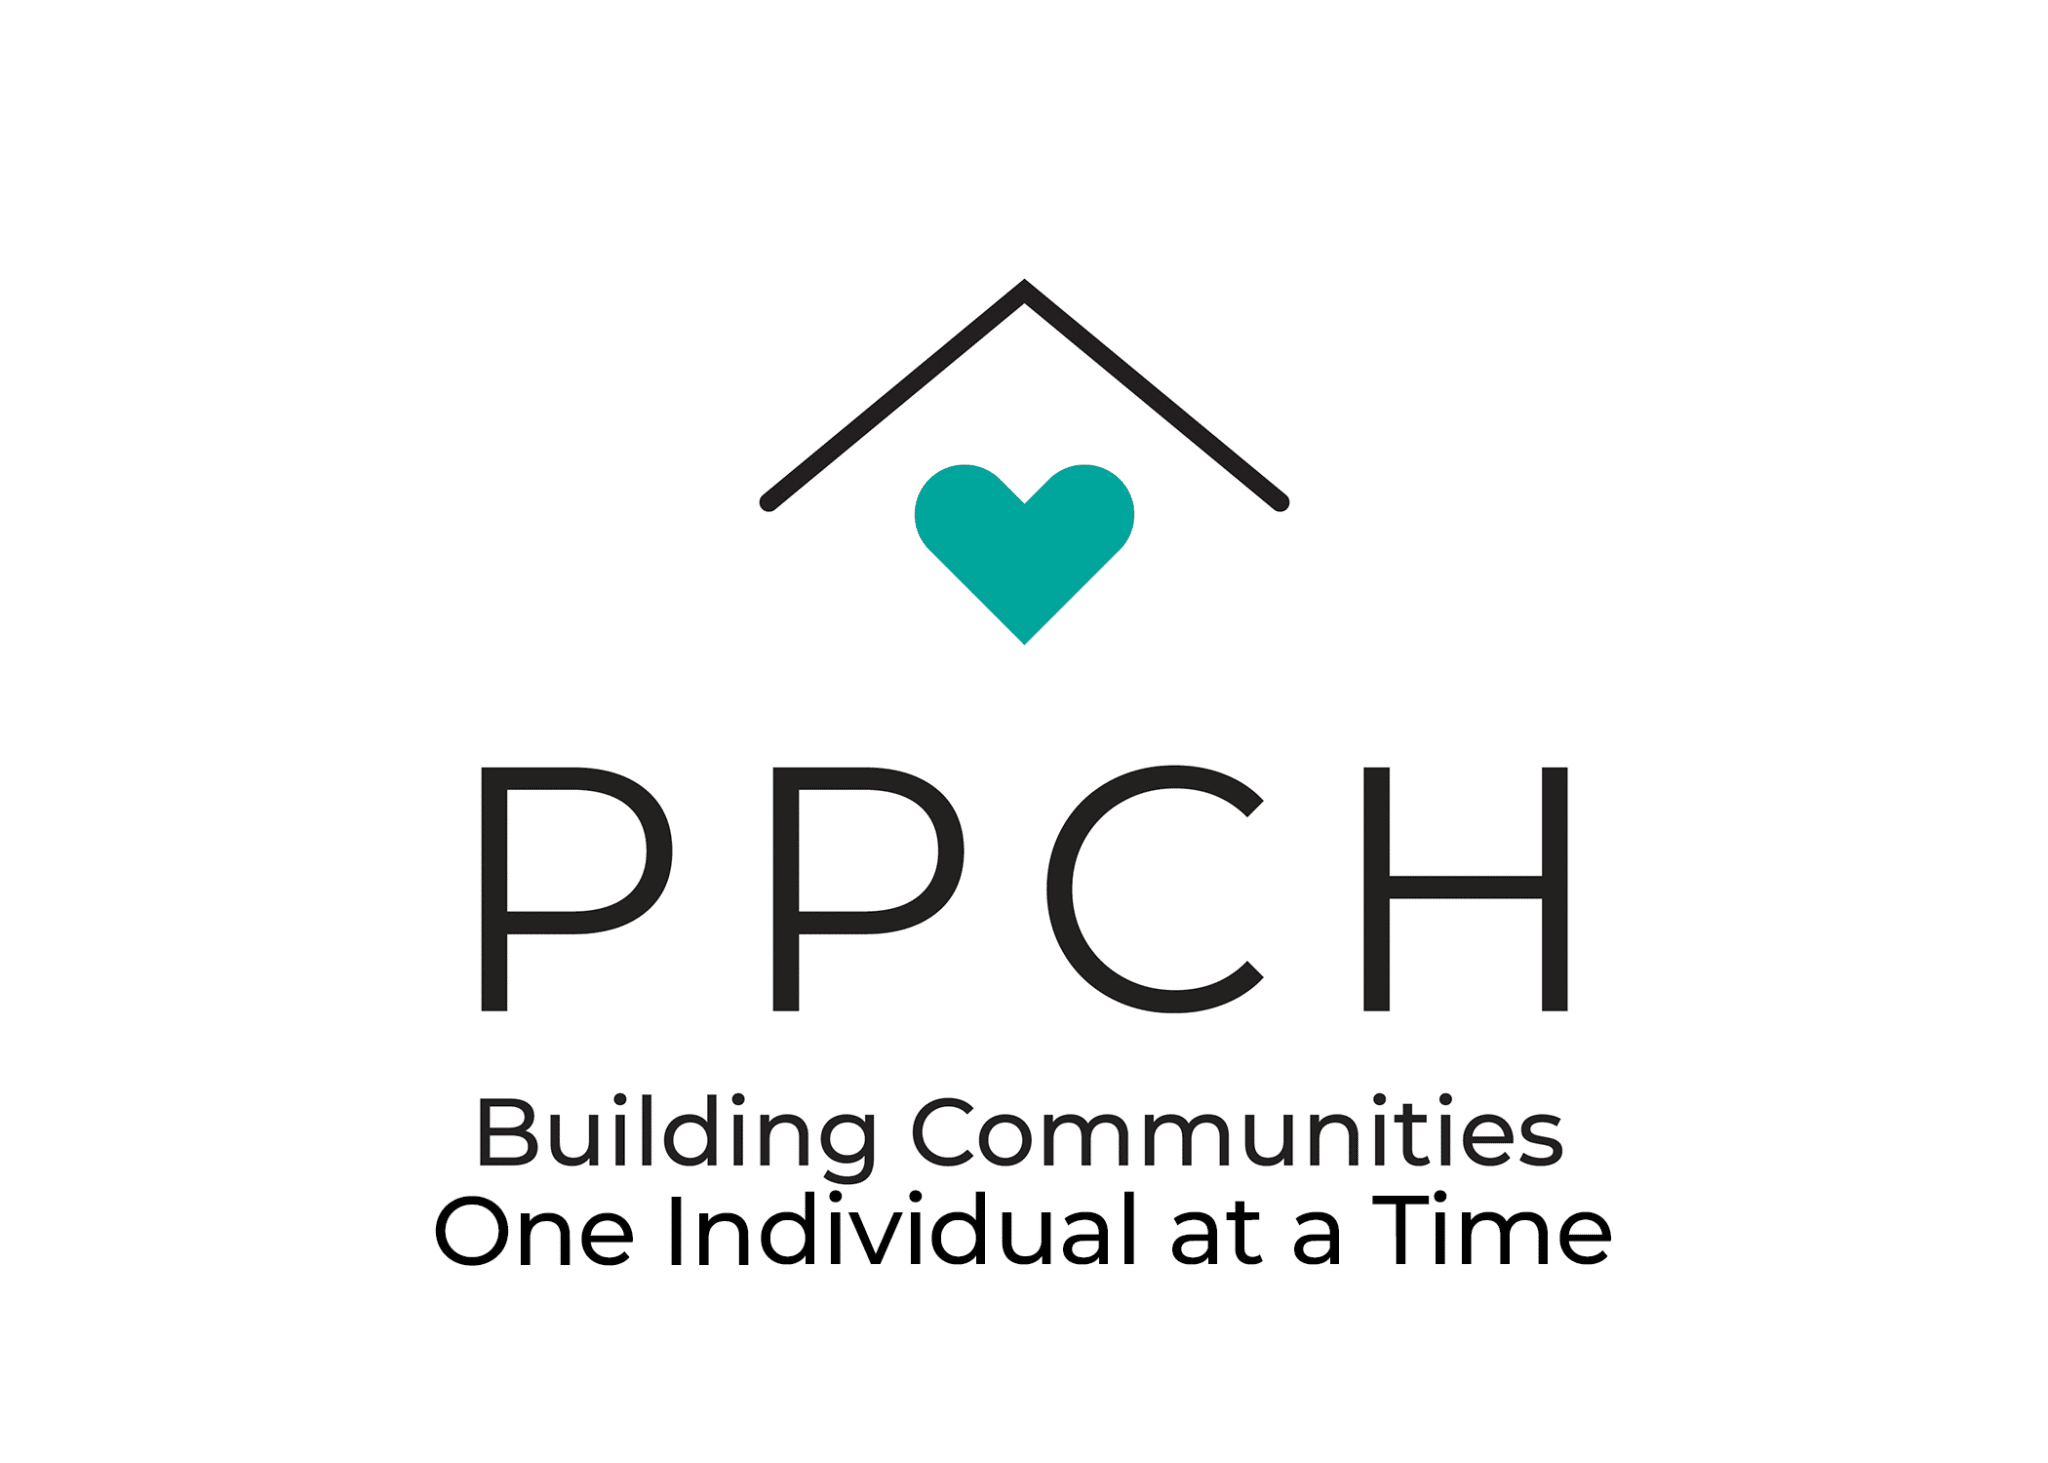 PPCH Building Communities